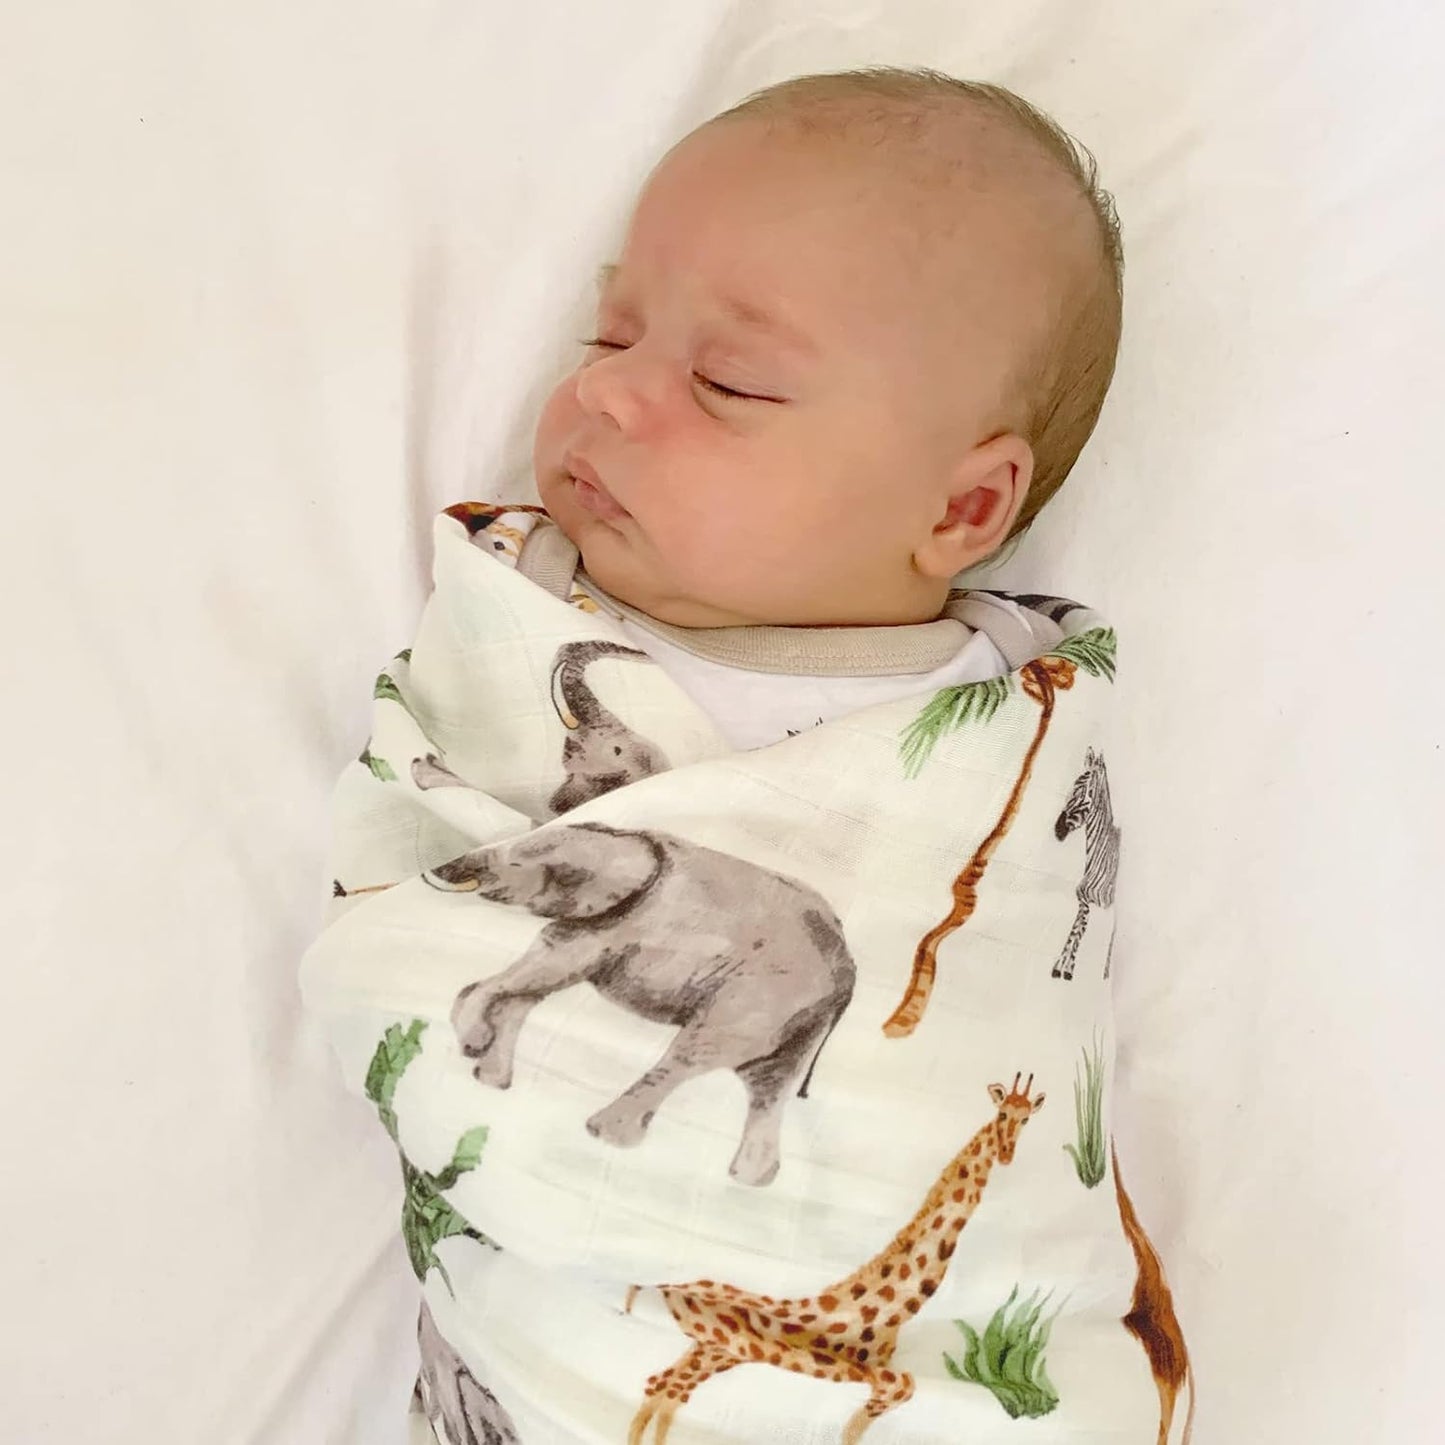 LifeTree 3 Pack Muslin Swaddle Blankets - Soft Viscose from Bamboo Cotton Baby Swaddle Blankets Unisex for Boys & Girls Newborn - Earthy Color Collection, Lightweight, Breathable, Large 47 x 47 inches